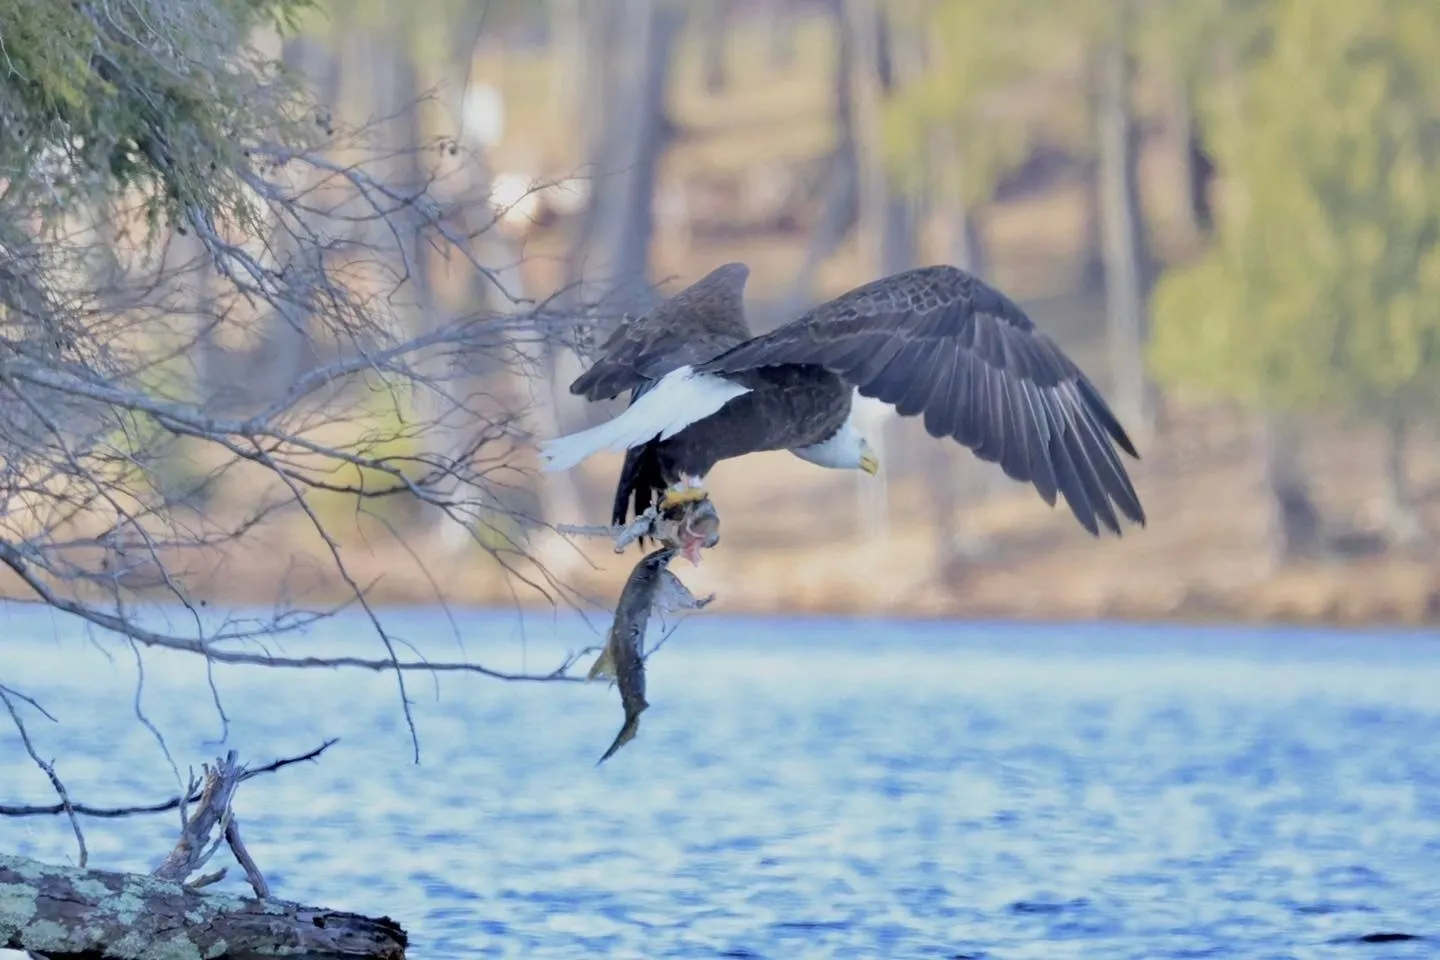 View of eagle catching a fish on display of the website